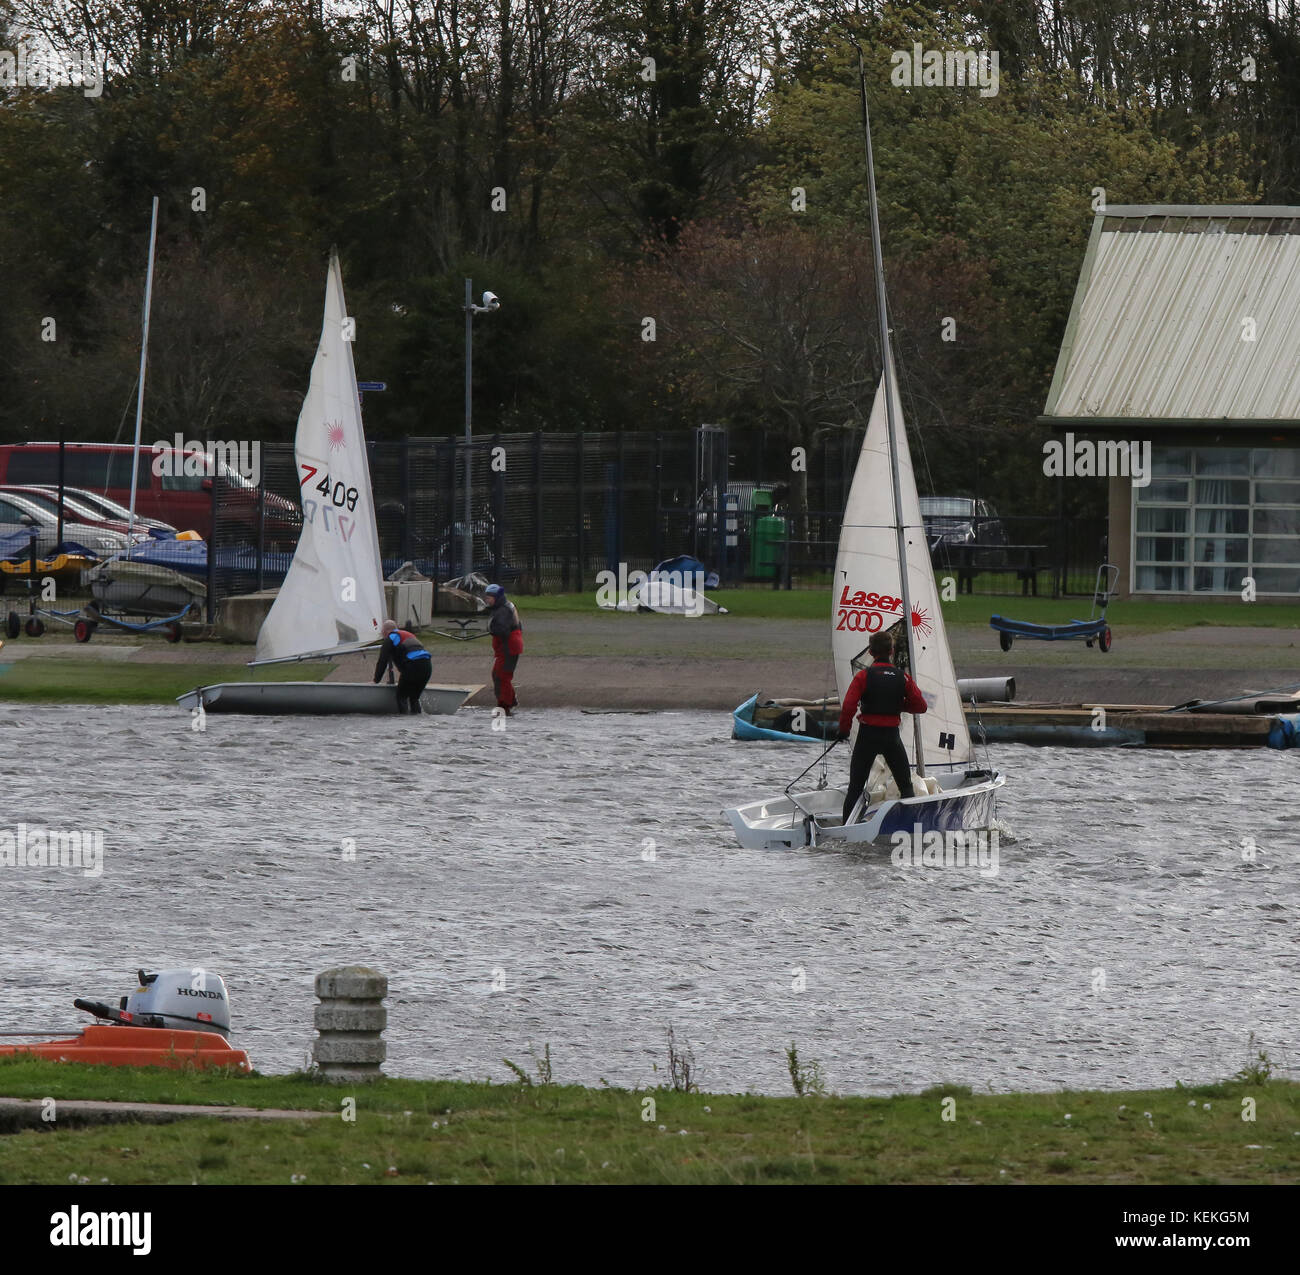 Craigavon Lakes, Northern Ireland UK. 22 October 2017. After another windy night unsettled weather continued in Northern Ireland today. Strong north-westerly winds up to lunchtime meant theses dinghy-sailors didn't venture out beyond the water-sports' harbour at the south lake. Credit: David Hunter/Alamy Live News. Stock Photo